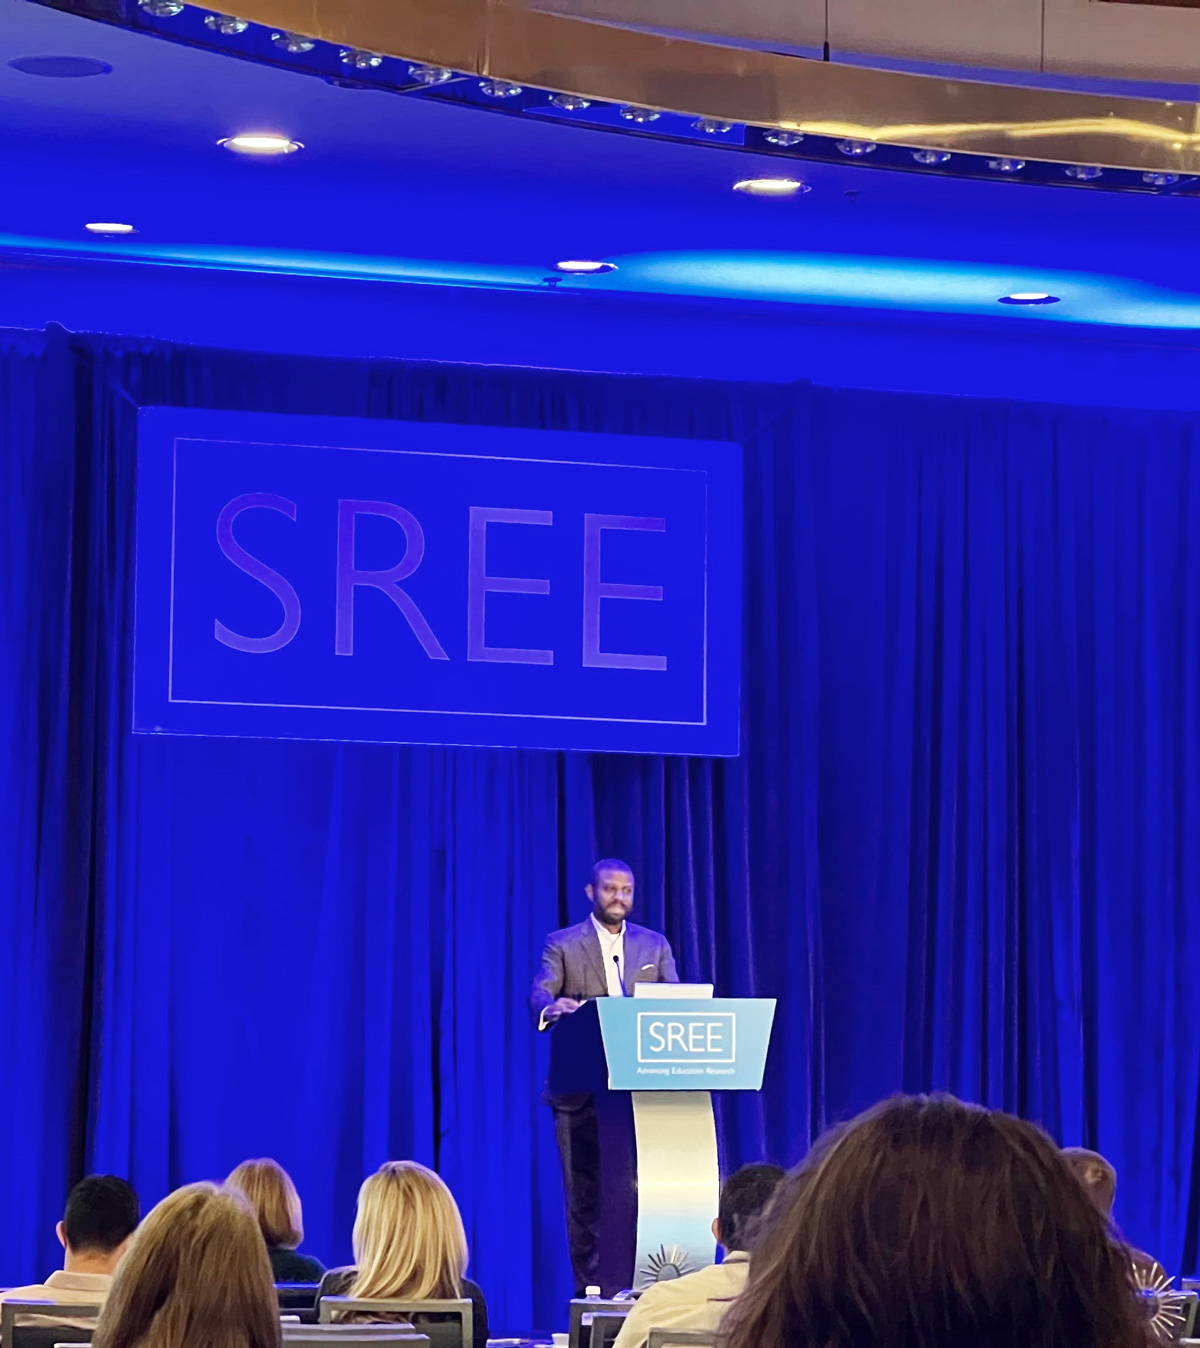 Dr. Ivory Toldson at a podium presenting at SREE